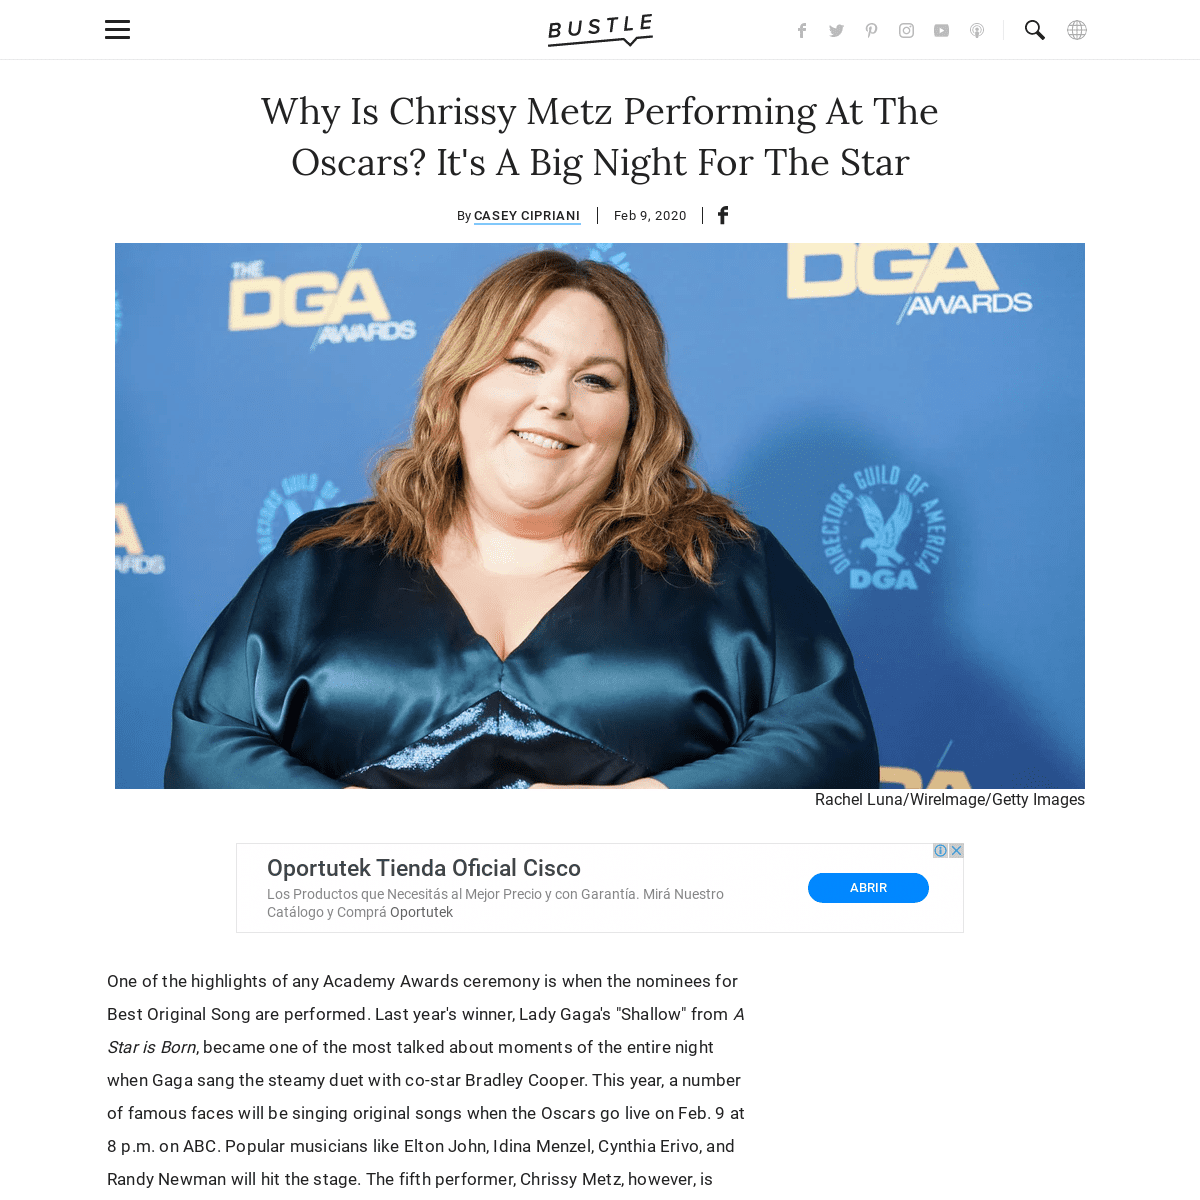 A complete backup of www.bustle.com/p/why-is-chrissy-metz-performing-at-the-oscars-its-a-big-night-for-the-star-21764641